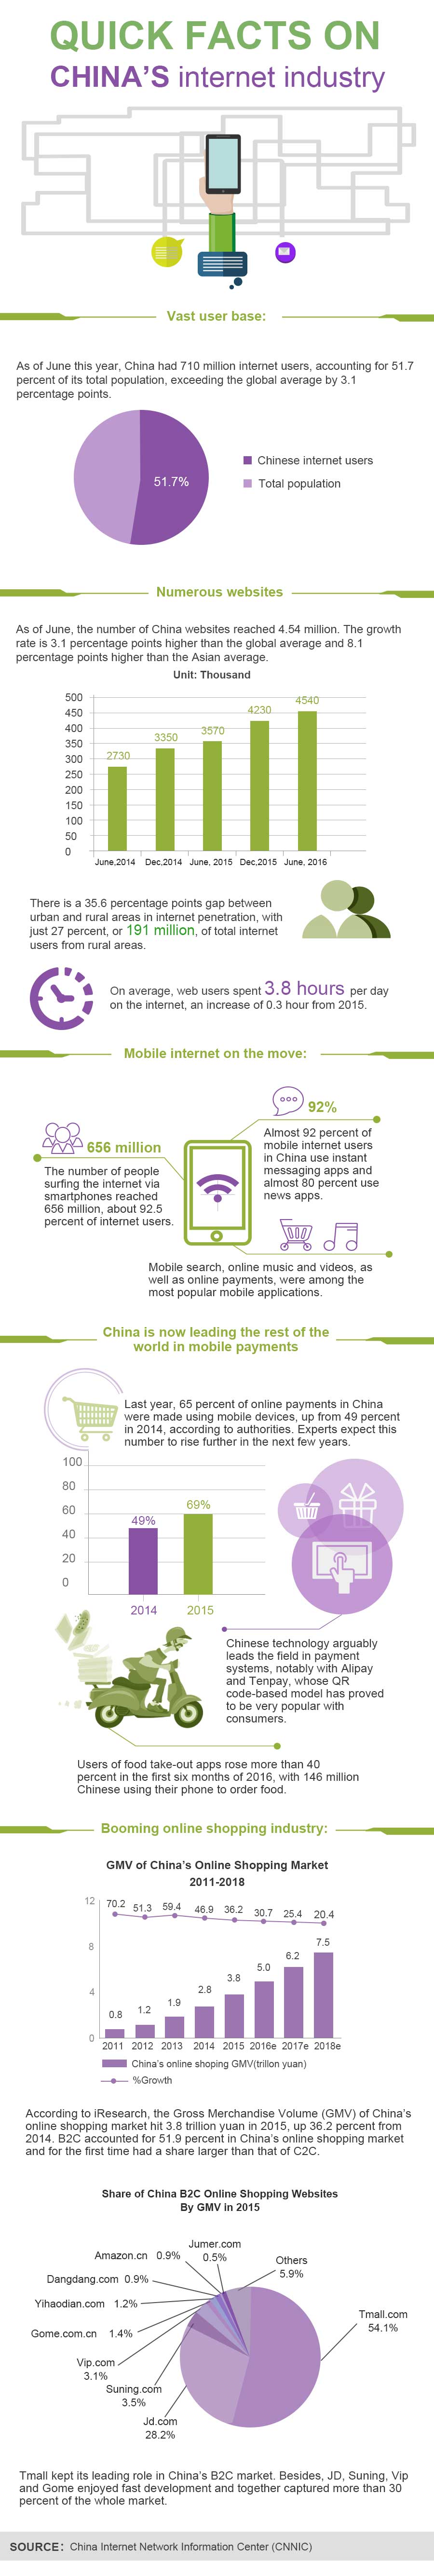 Quick facts on China's internet industry